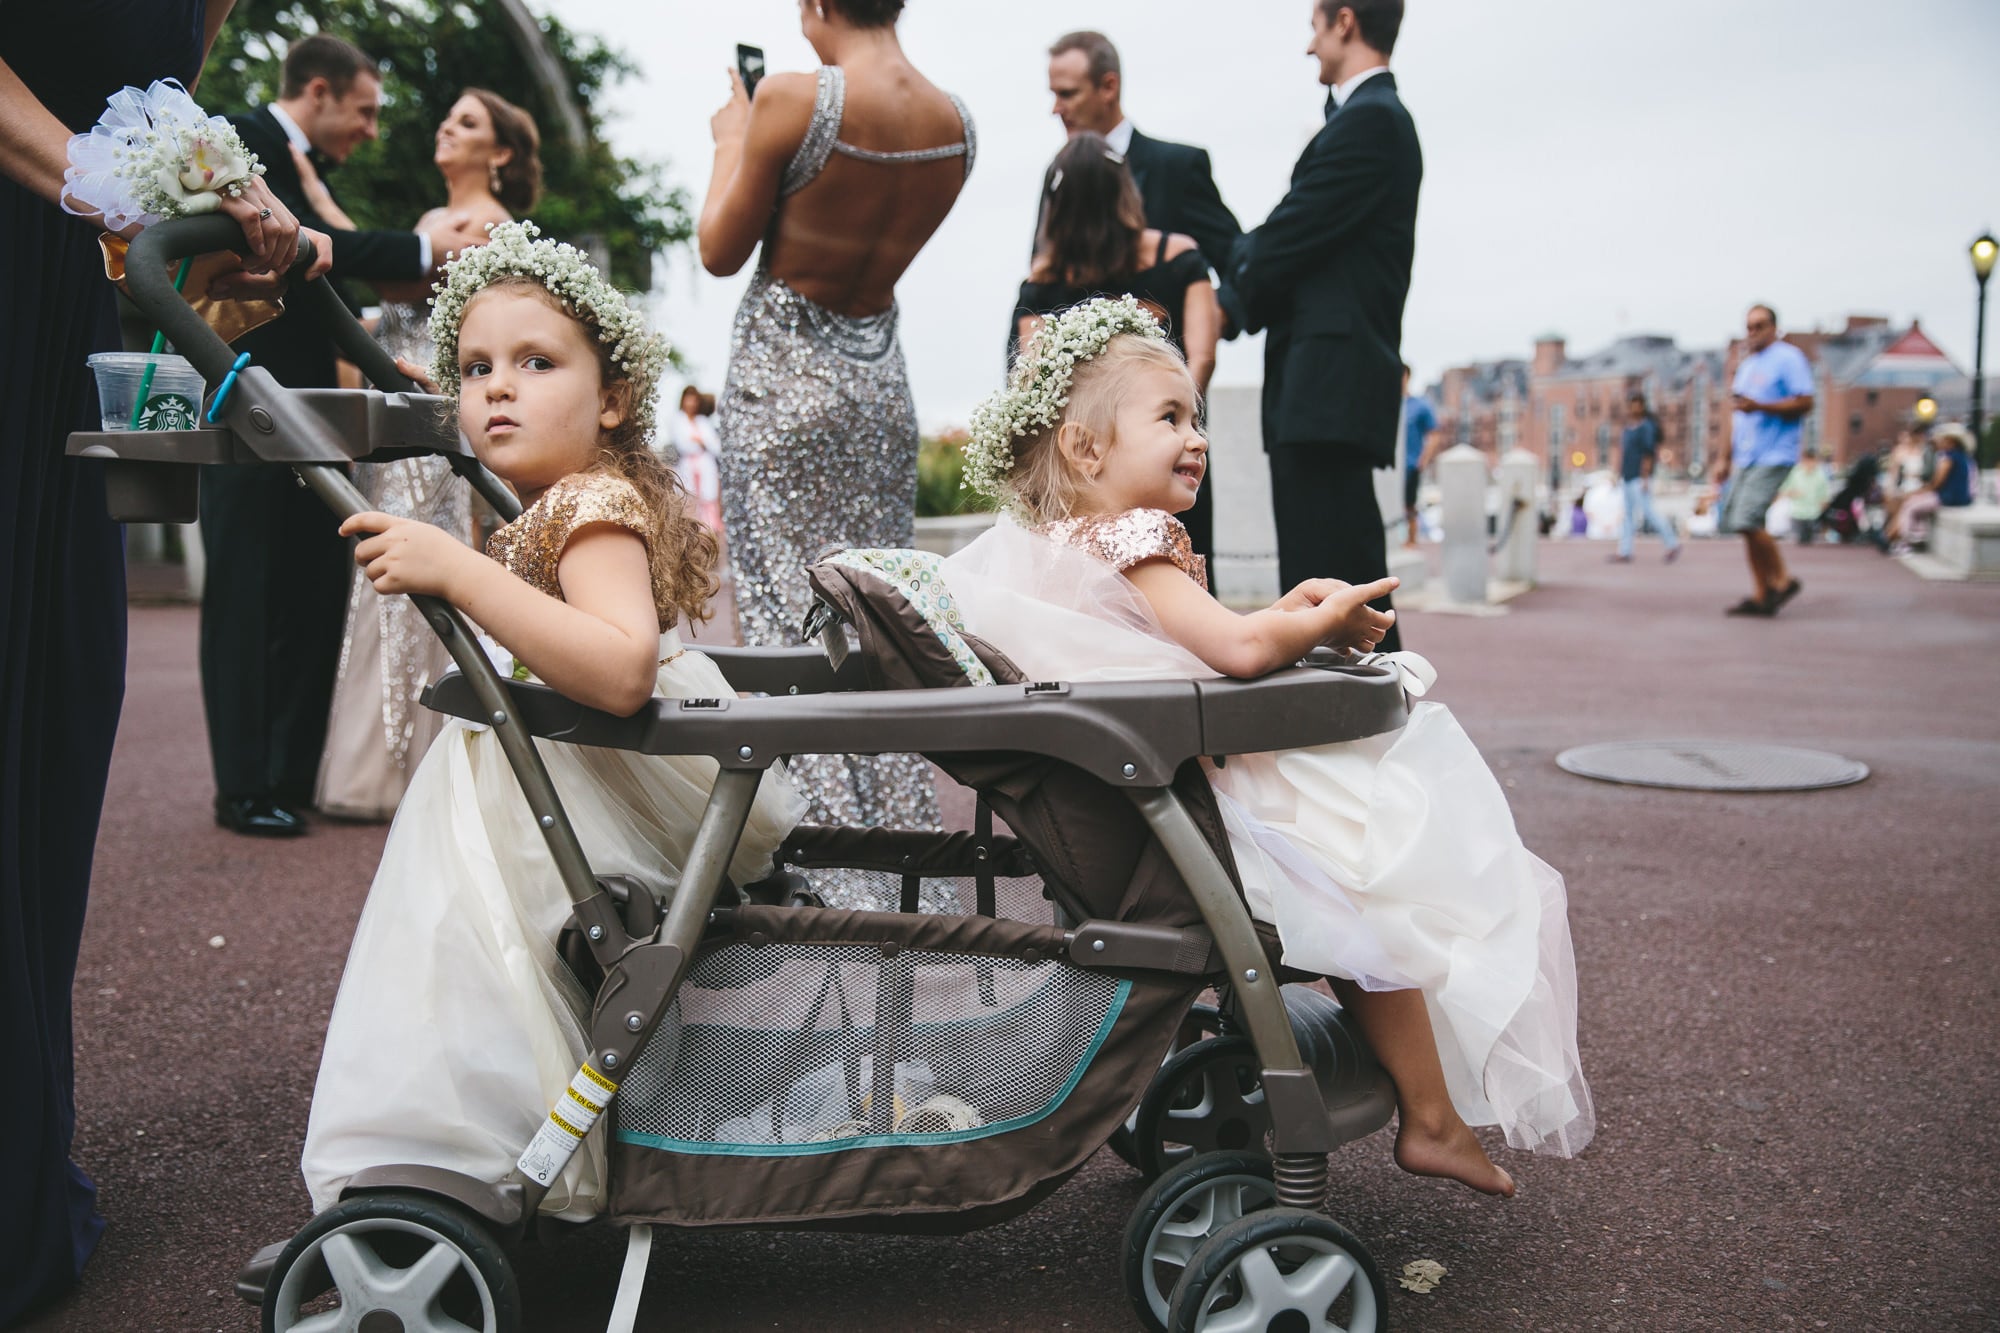 This documentary photograph of two flower girls sitting in a stroller at a Boston Wedding is one of the best wedding photographs of 2016